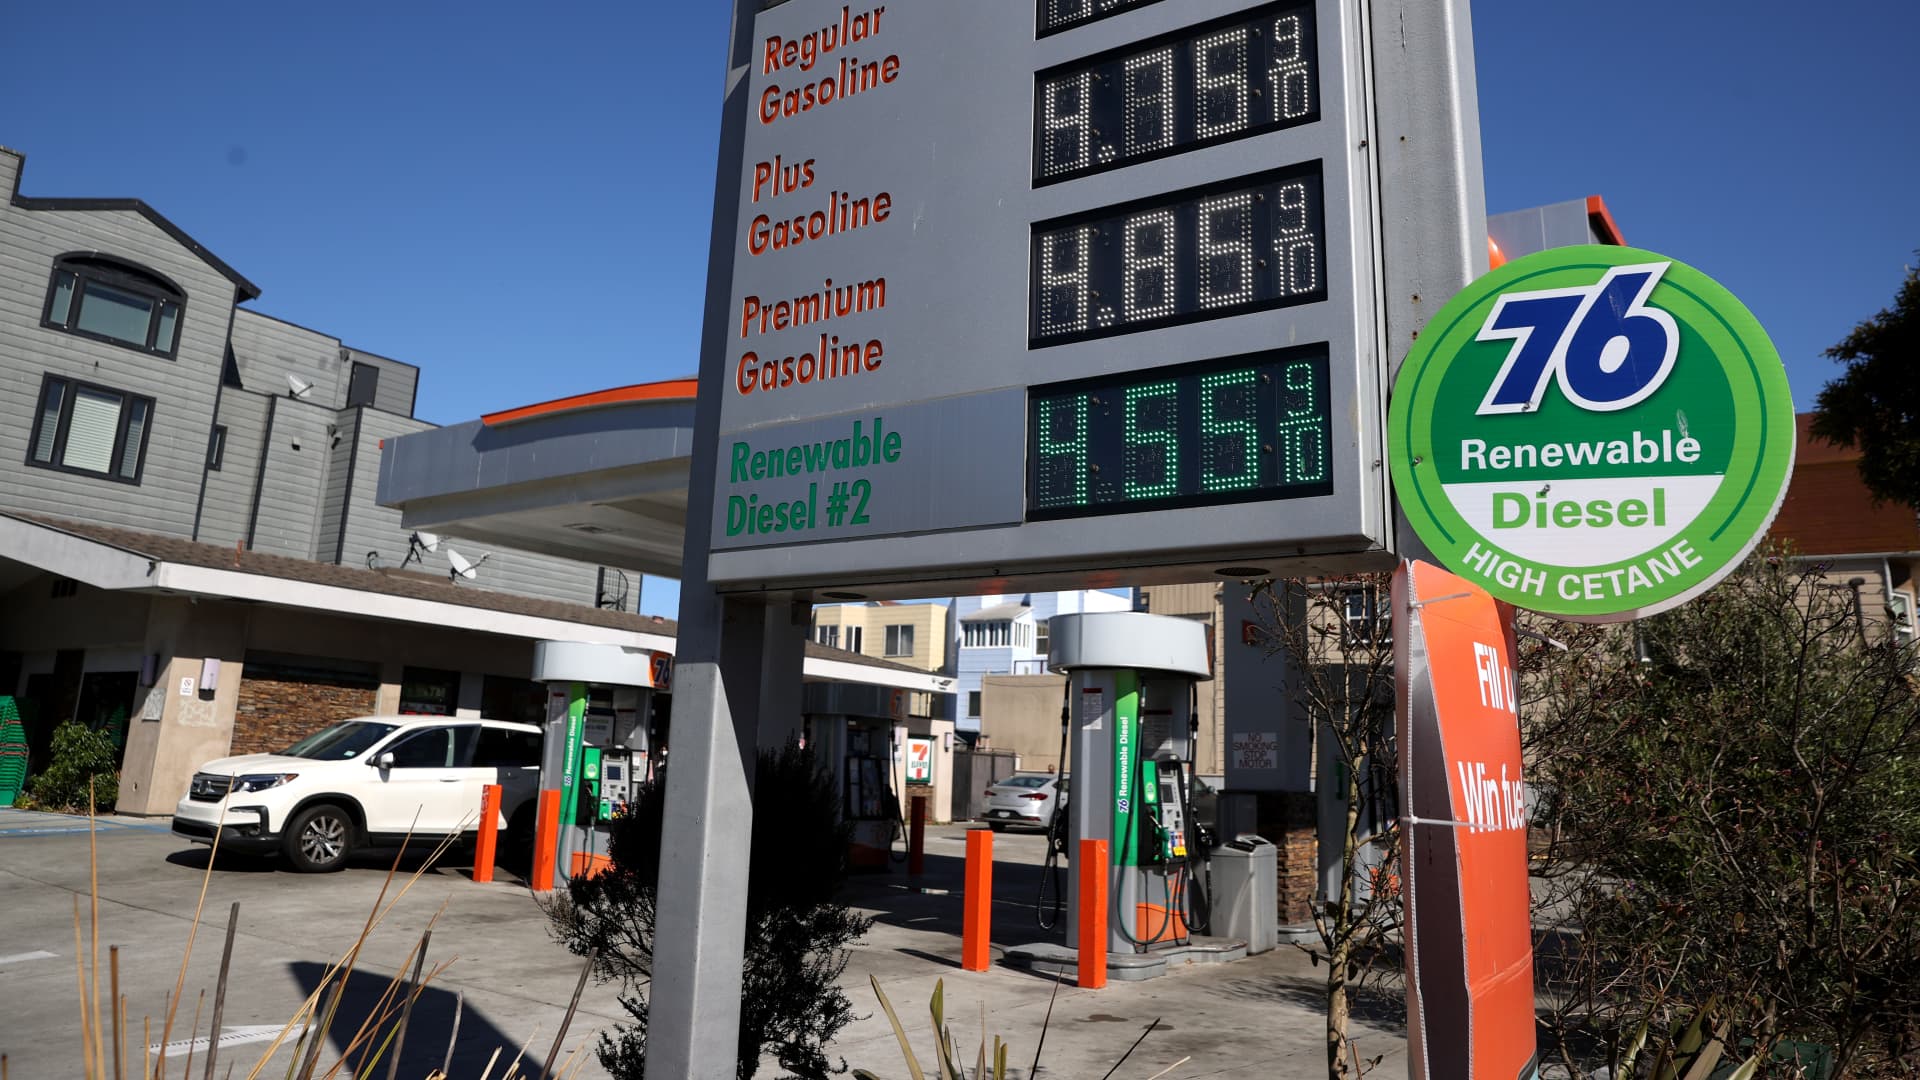 Gas prices were more than $4.00 per gallon at a San Francisco gas station on Oct. 12, 2021.